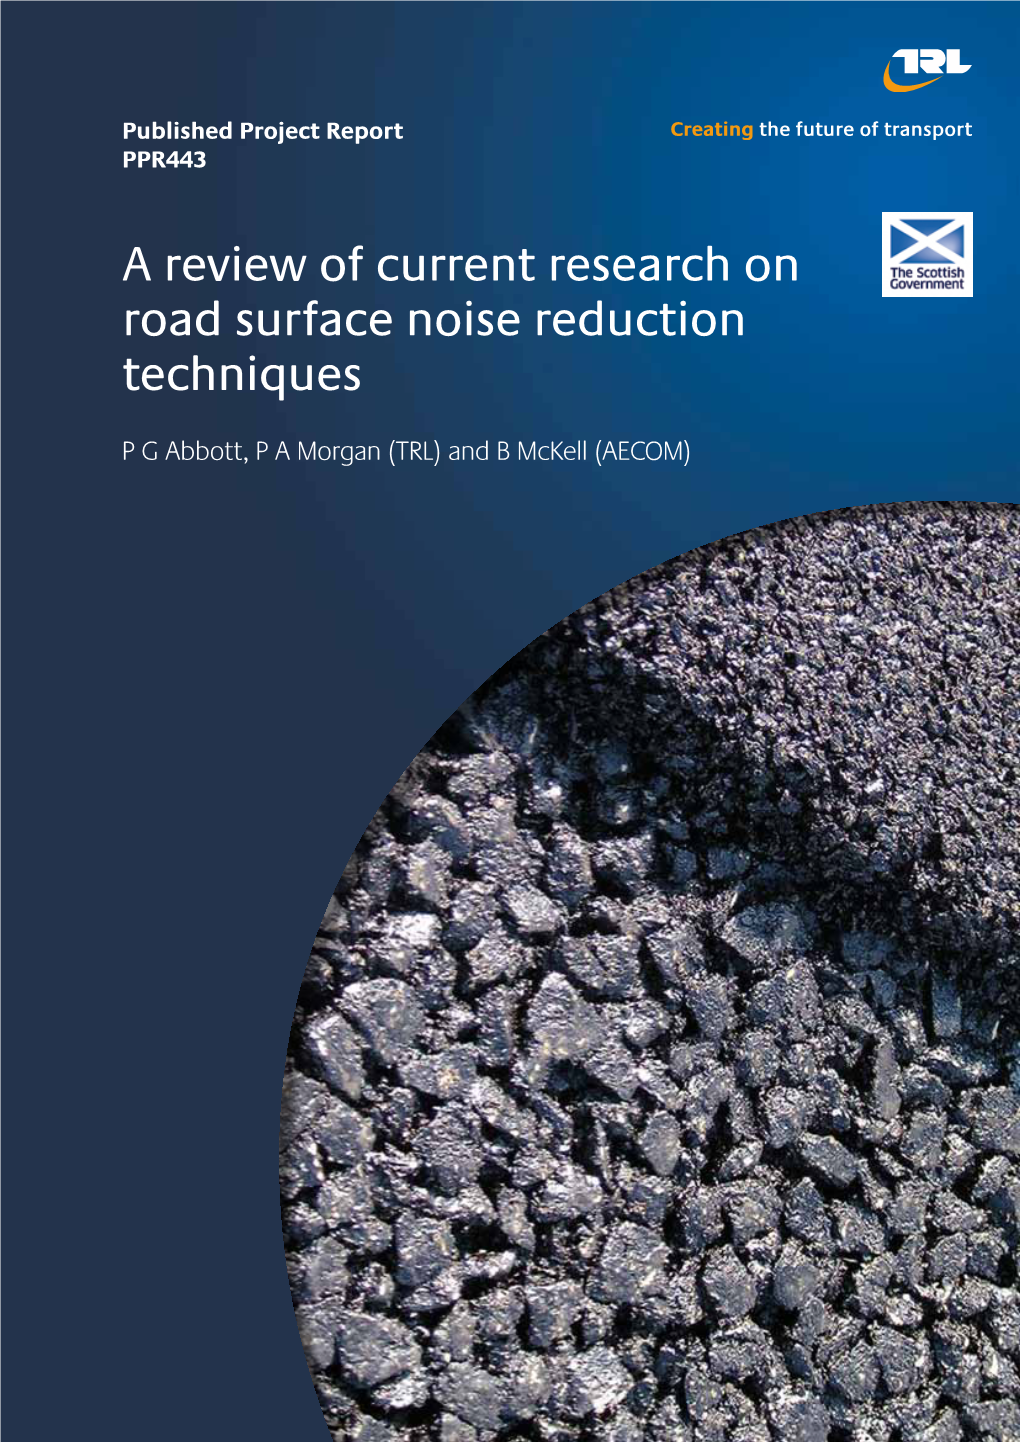 A Review of Current Research on Road Surface Noise Reduction Techniques